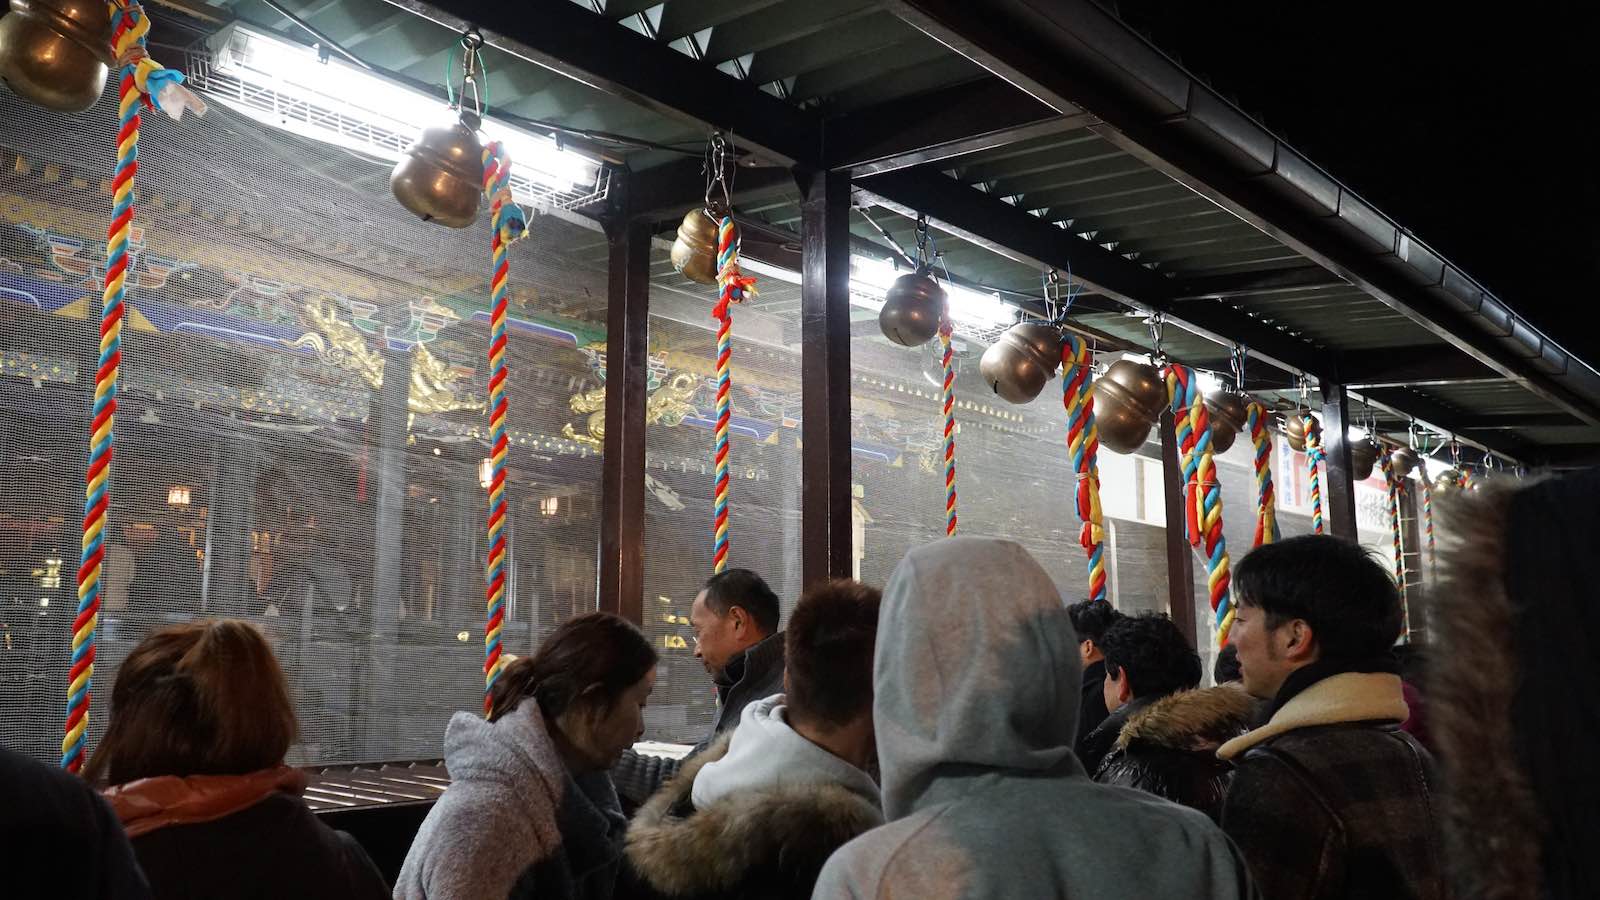 Then we went to a local temple in the city after midnight and rang in the new year.